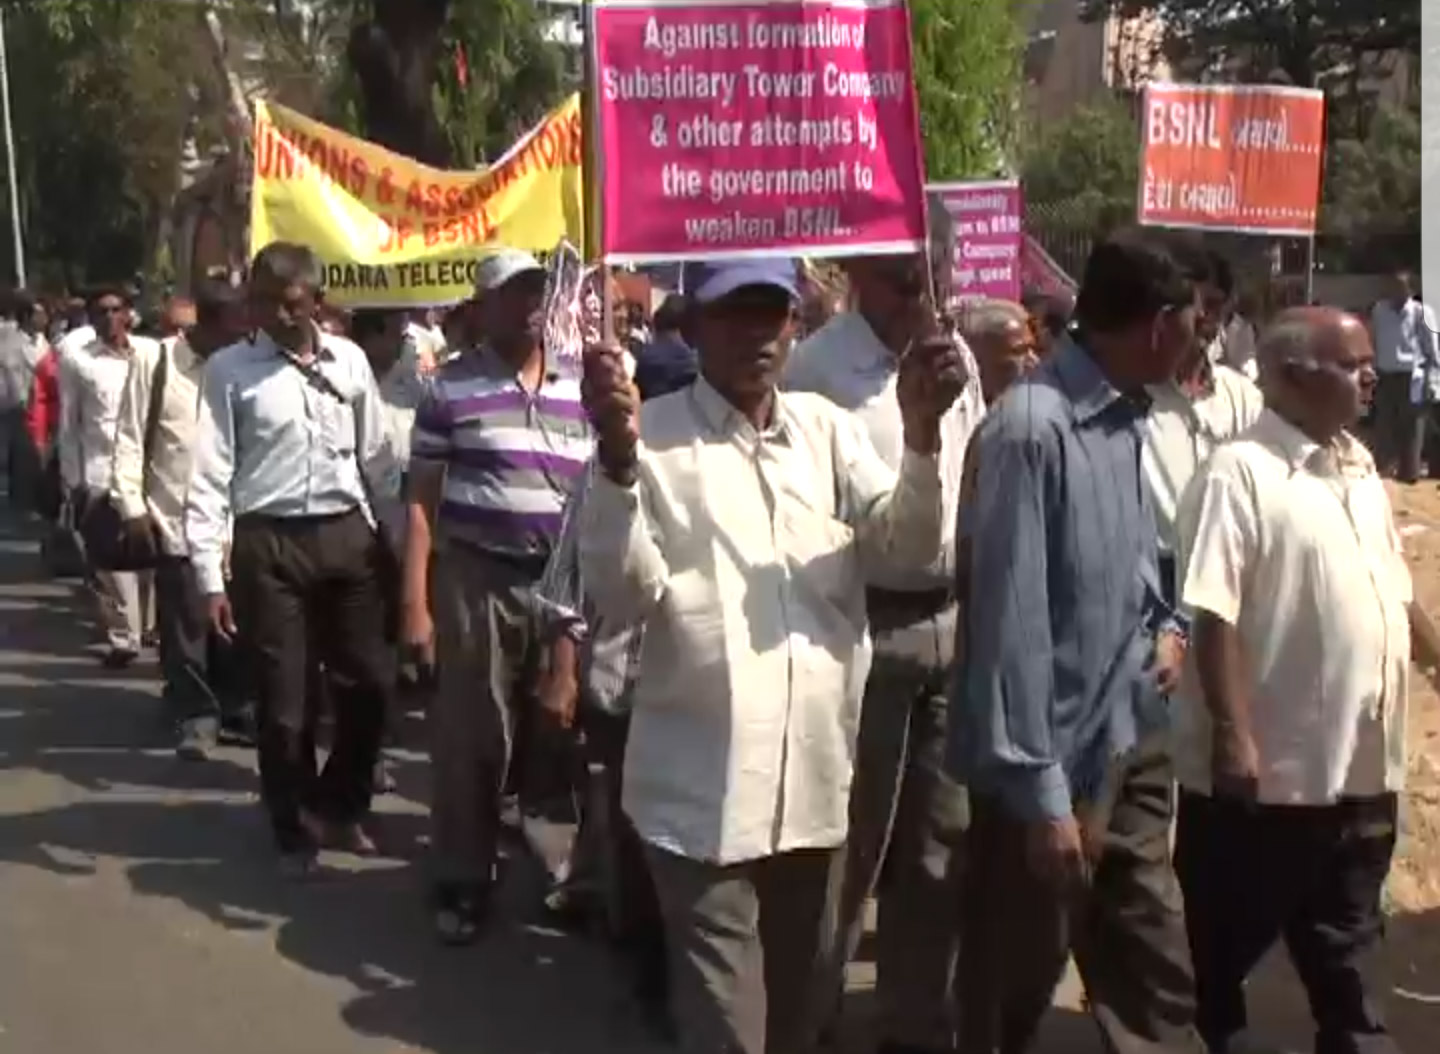 BSNL employees take out rally in Vadodara